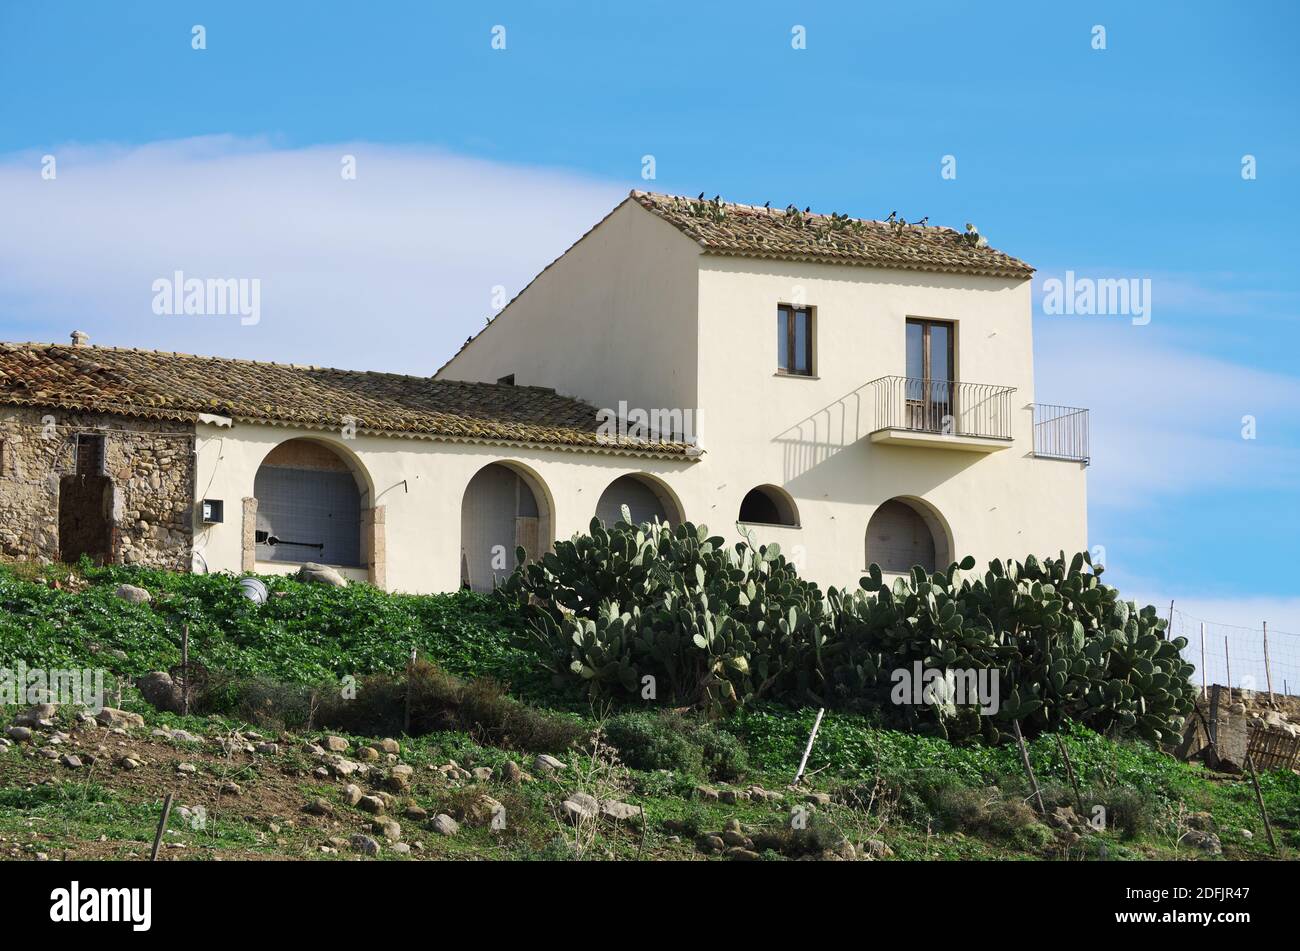 a rural house of the Sicily traditional architecture, in front of it a hedge of prickly pears acts as a fence and they also grow on the top roof Stock Photo